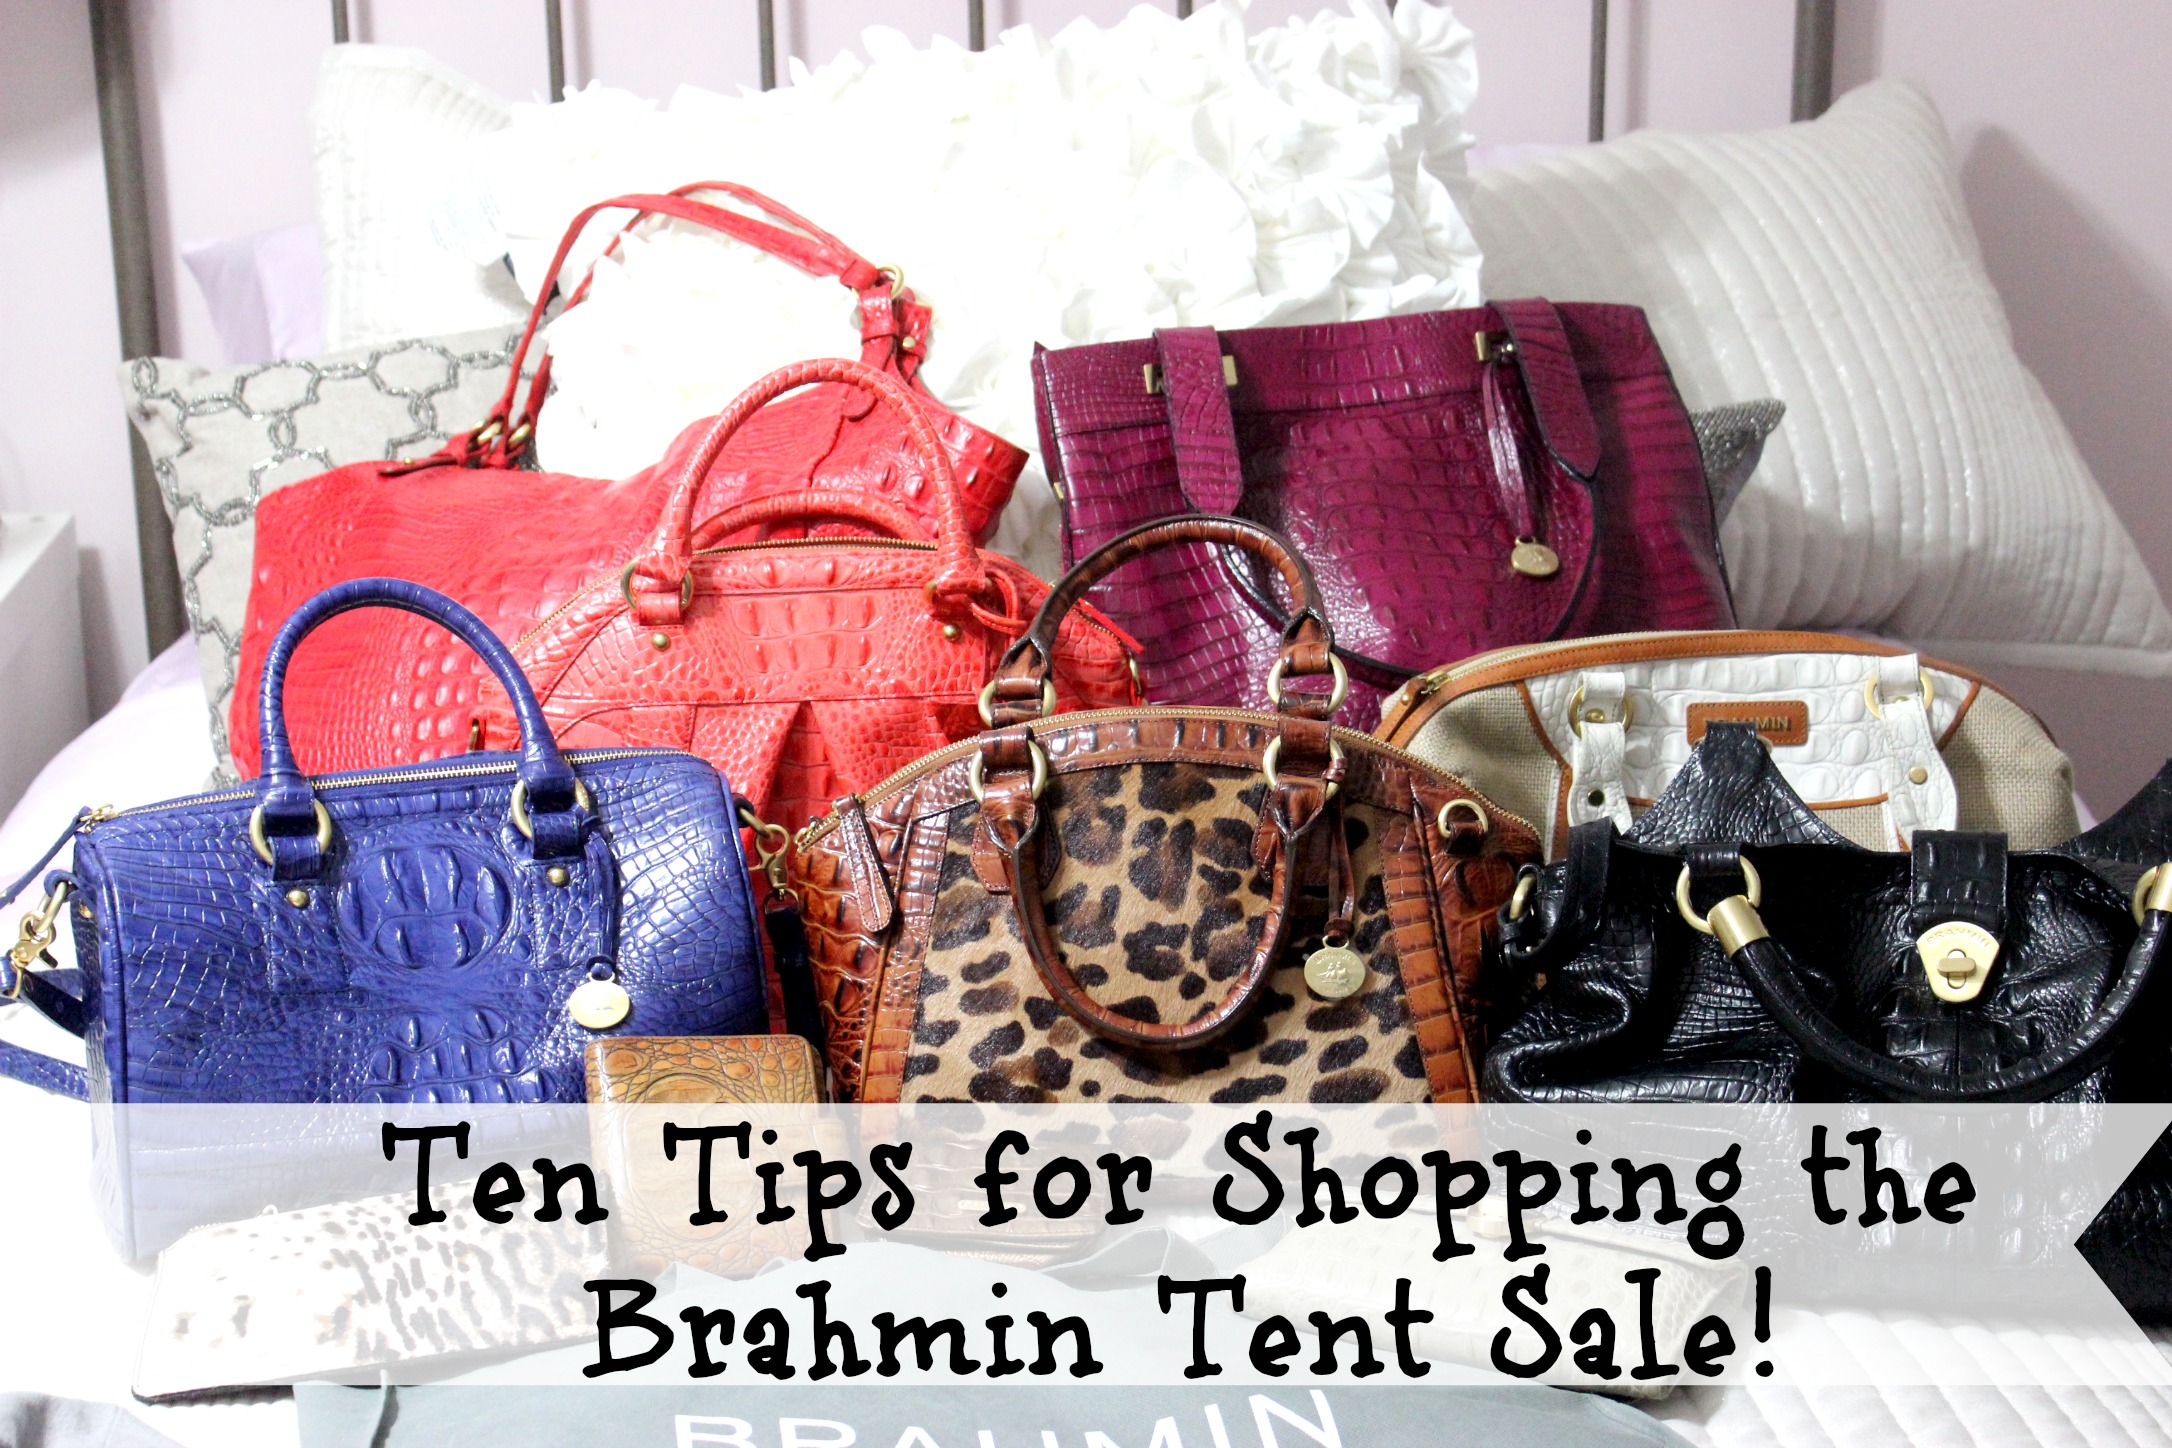 The Brahmin Tent Sale is Almost Here